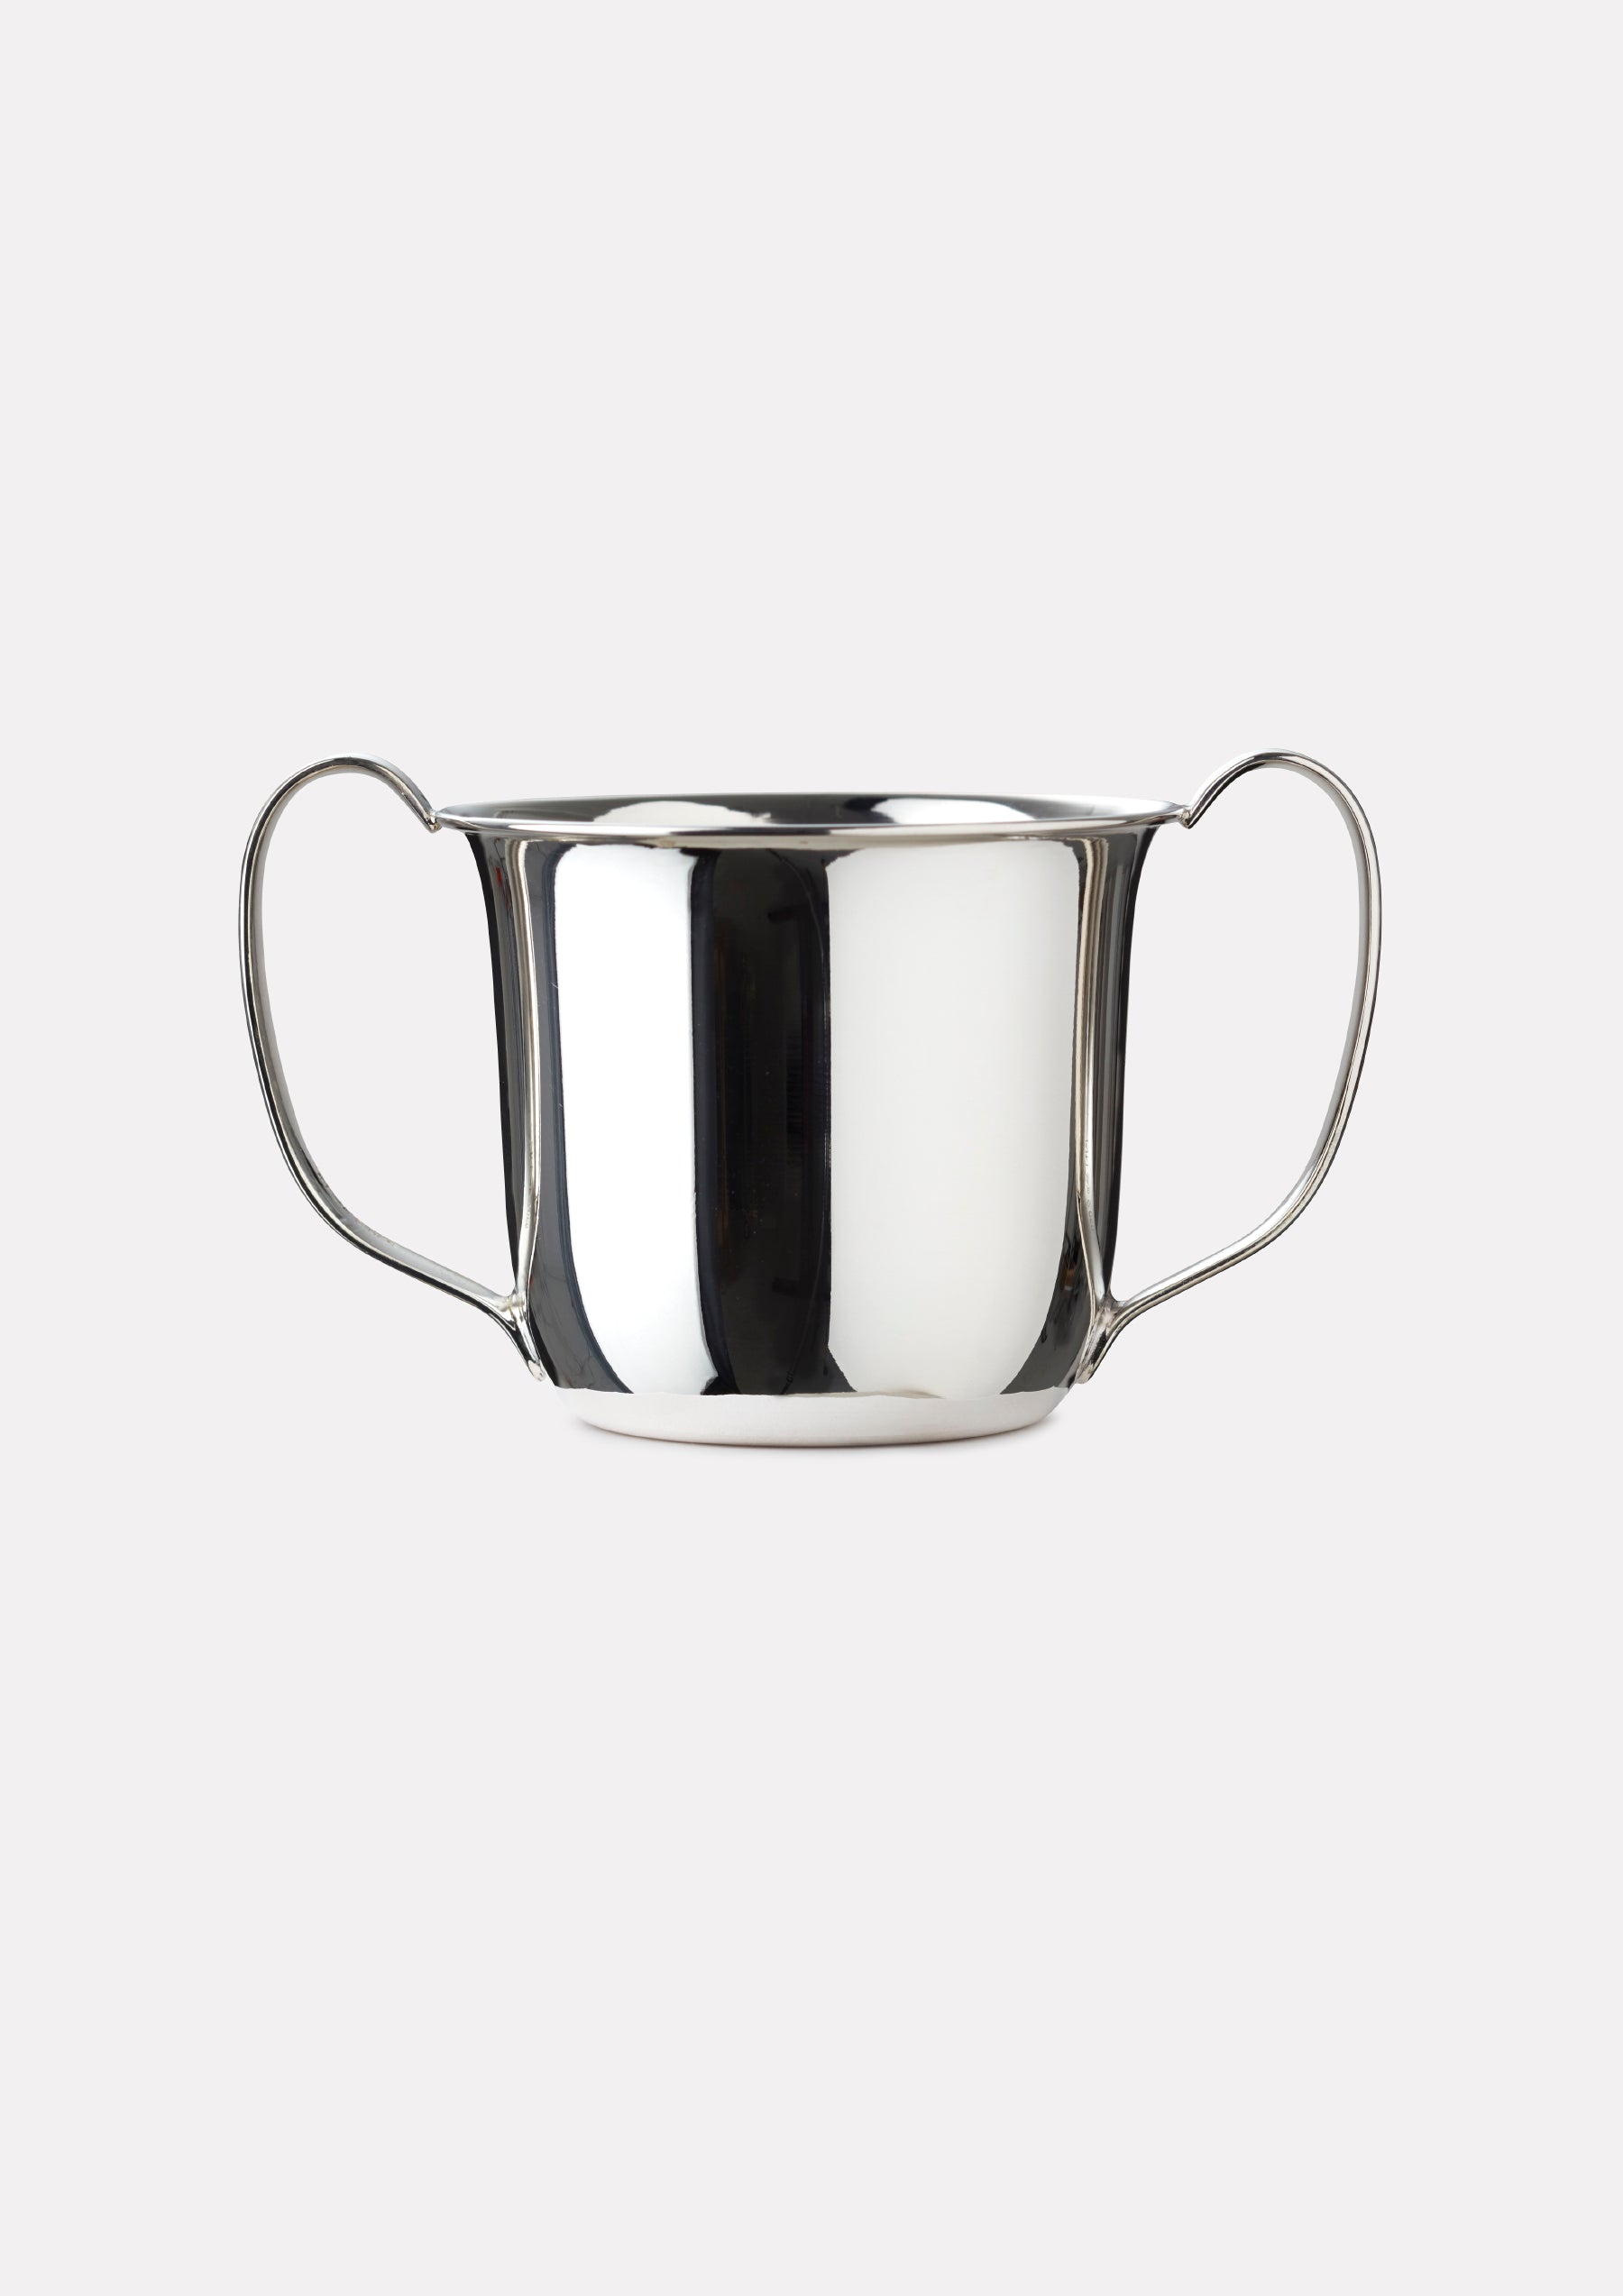 Children's mug with two handles